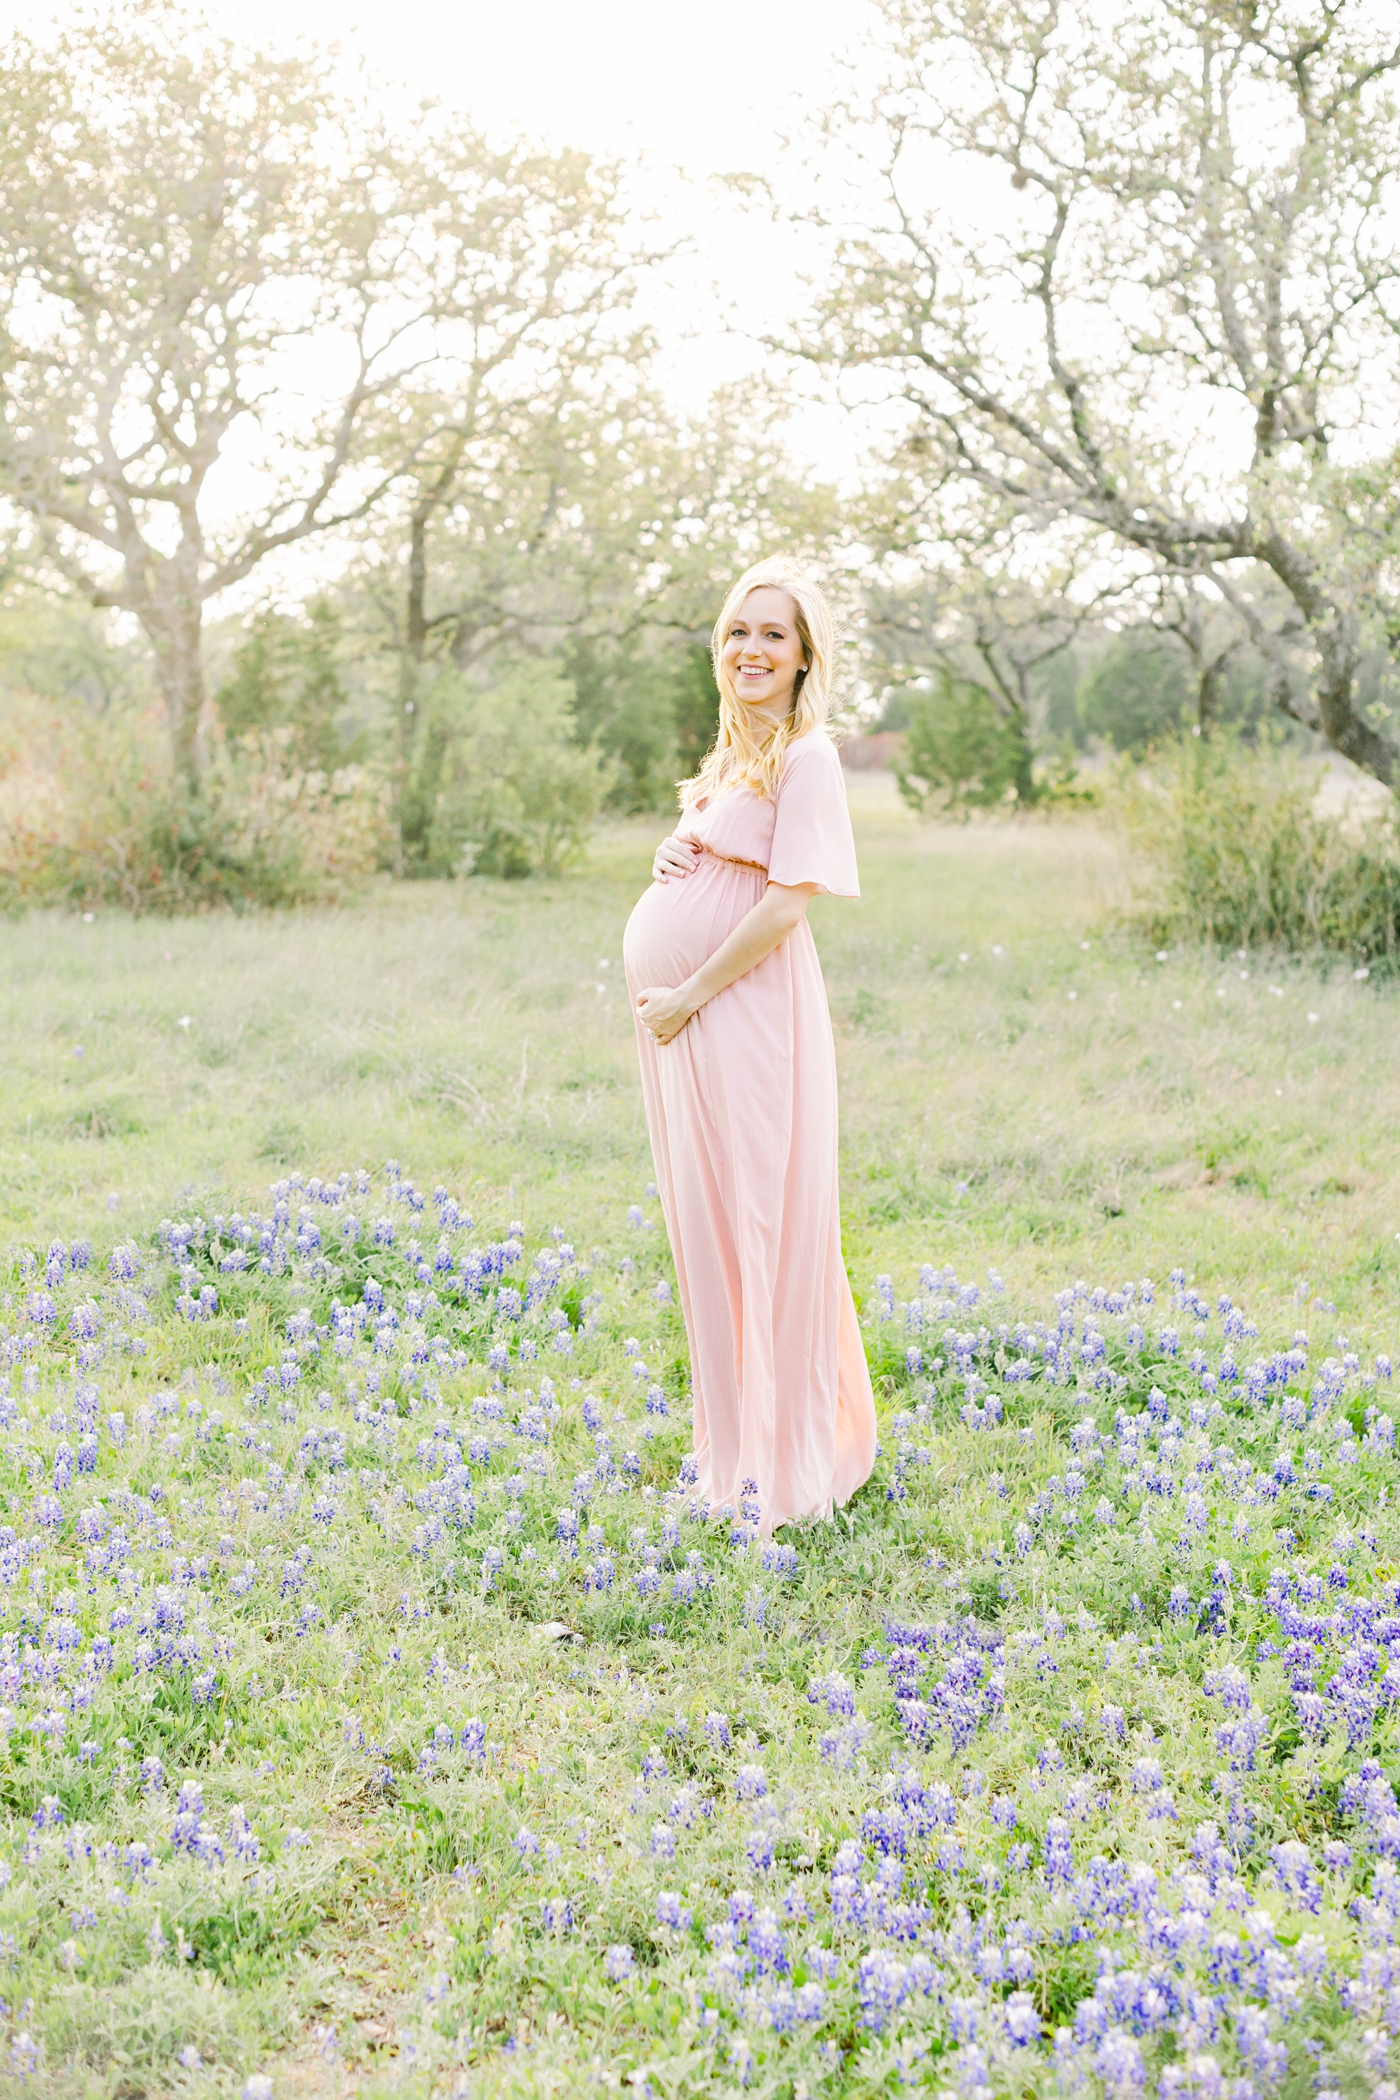 Mom standing in bluebonnets during maternity session in Austin. Photo by Sana Ahmed Photography.